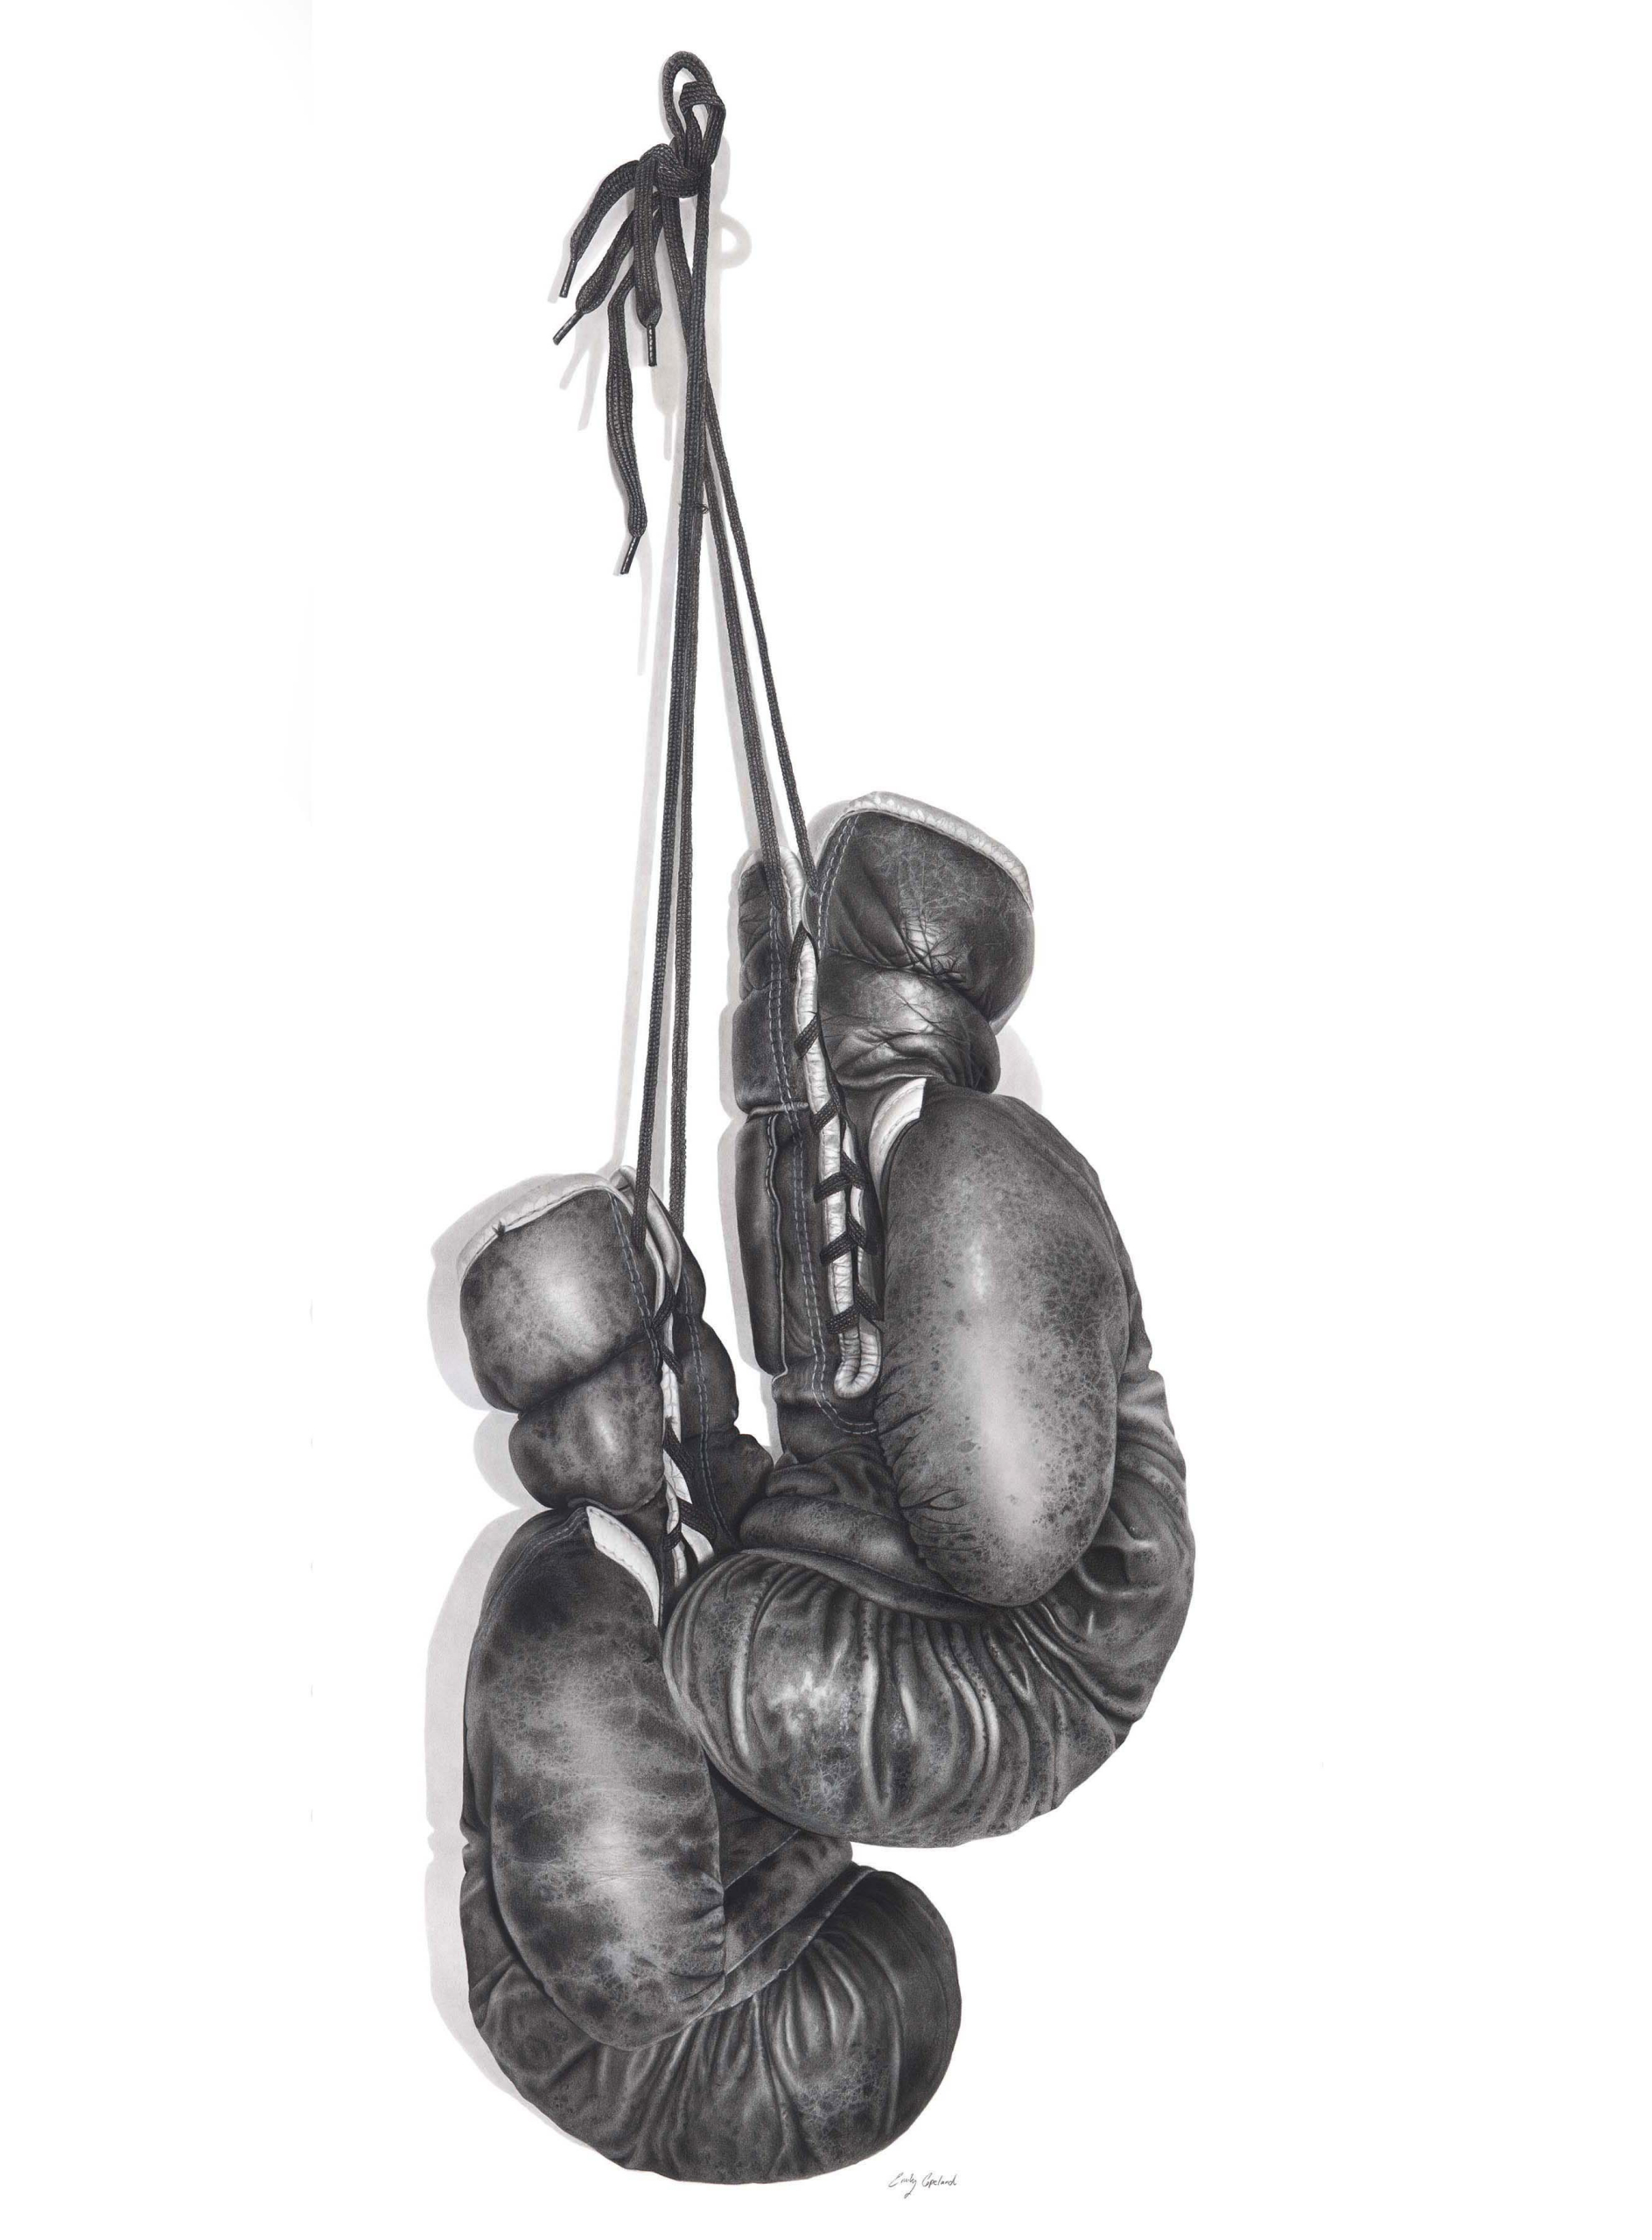 boxing gloves drawing black and white